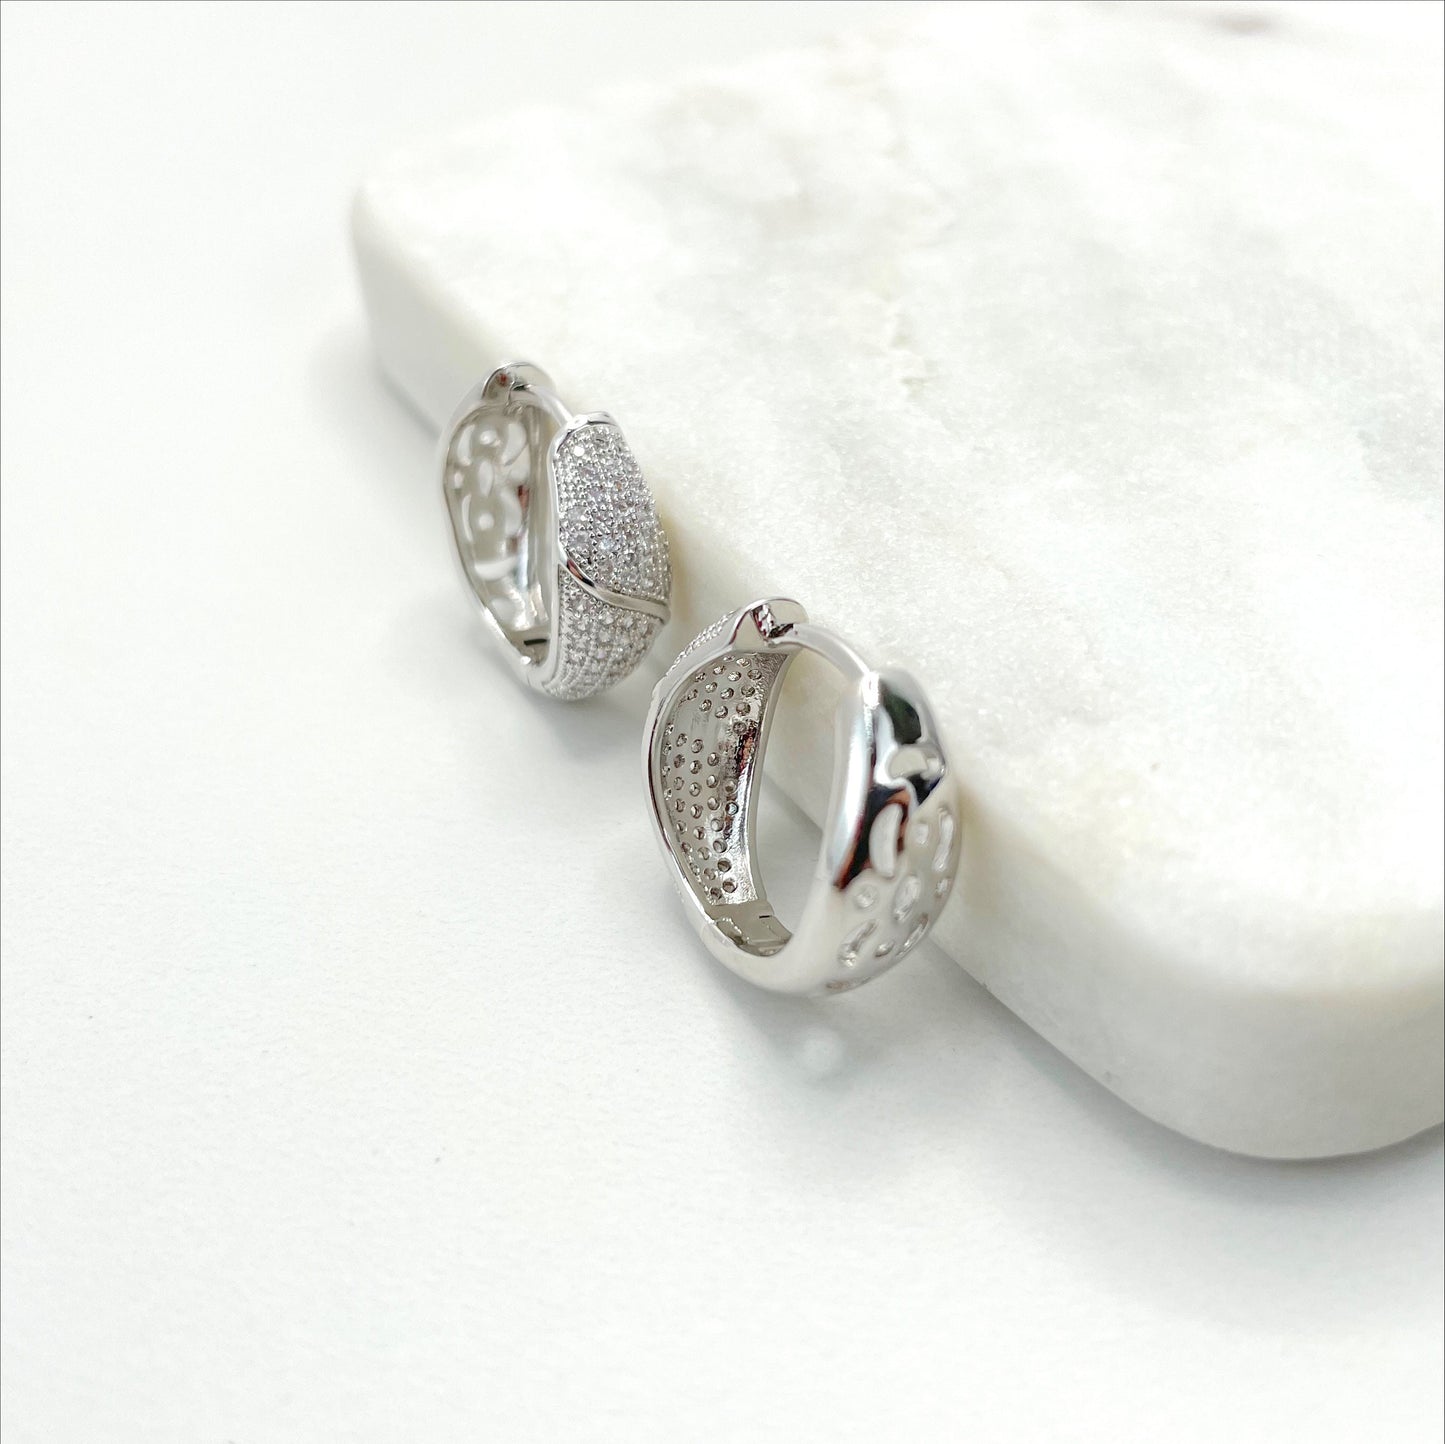 Silver Filled with Micro Cubic Zirconia CZ 20mm Hoops Earrings Wholesale Jewelry Making Supplies